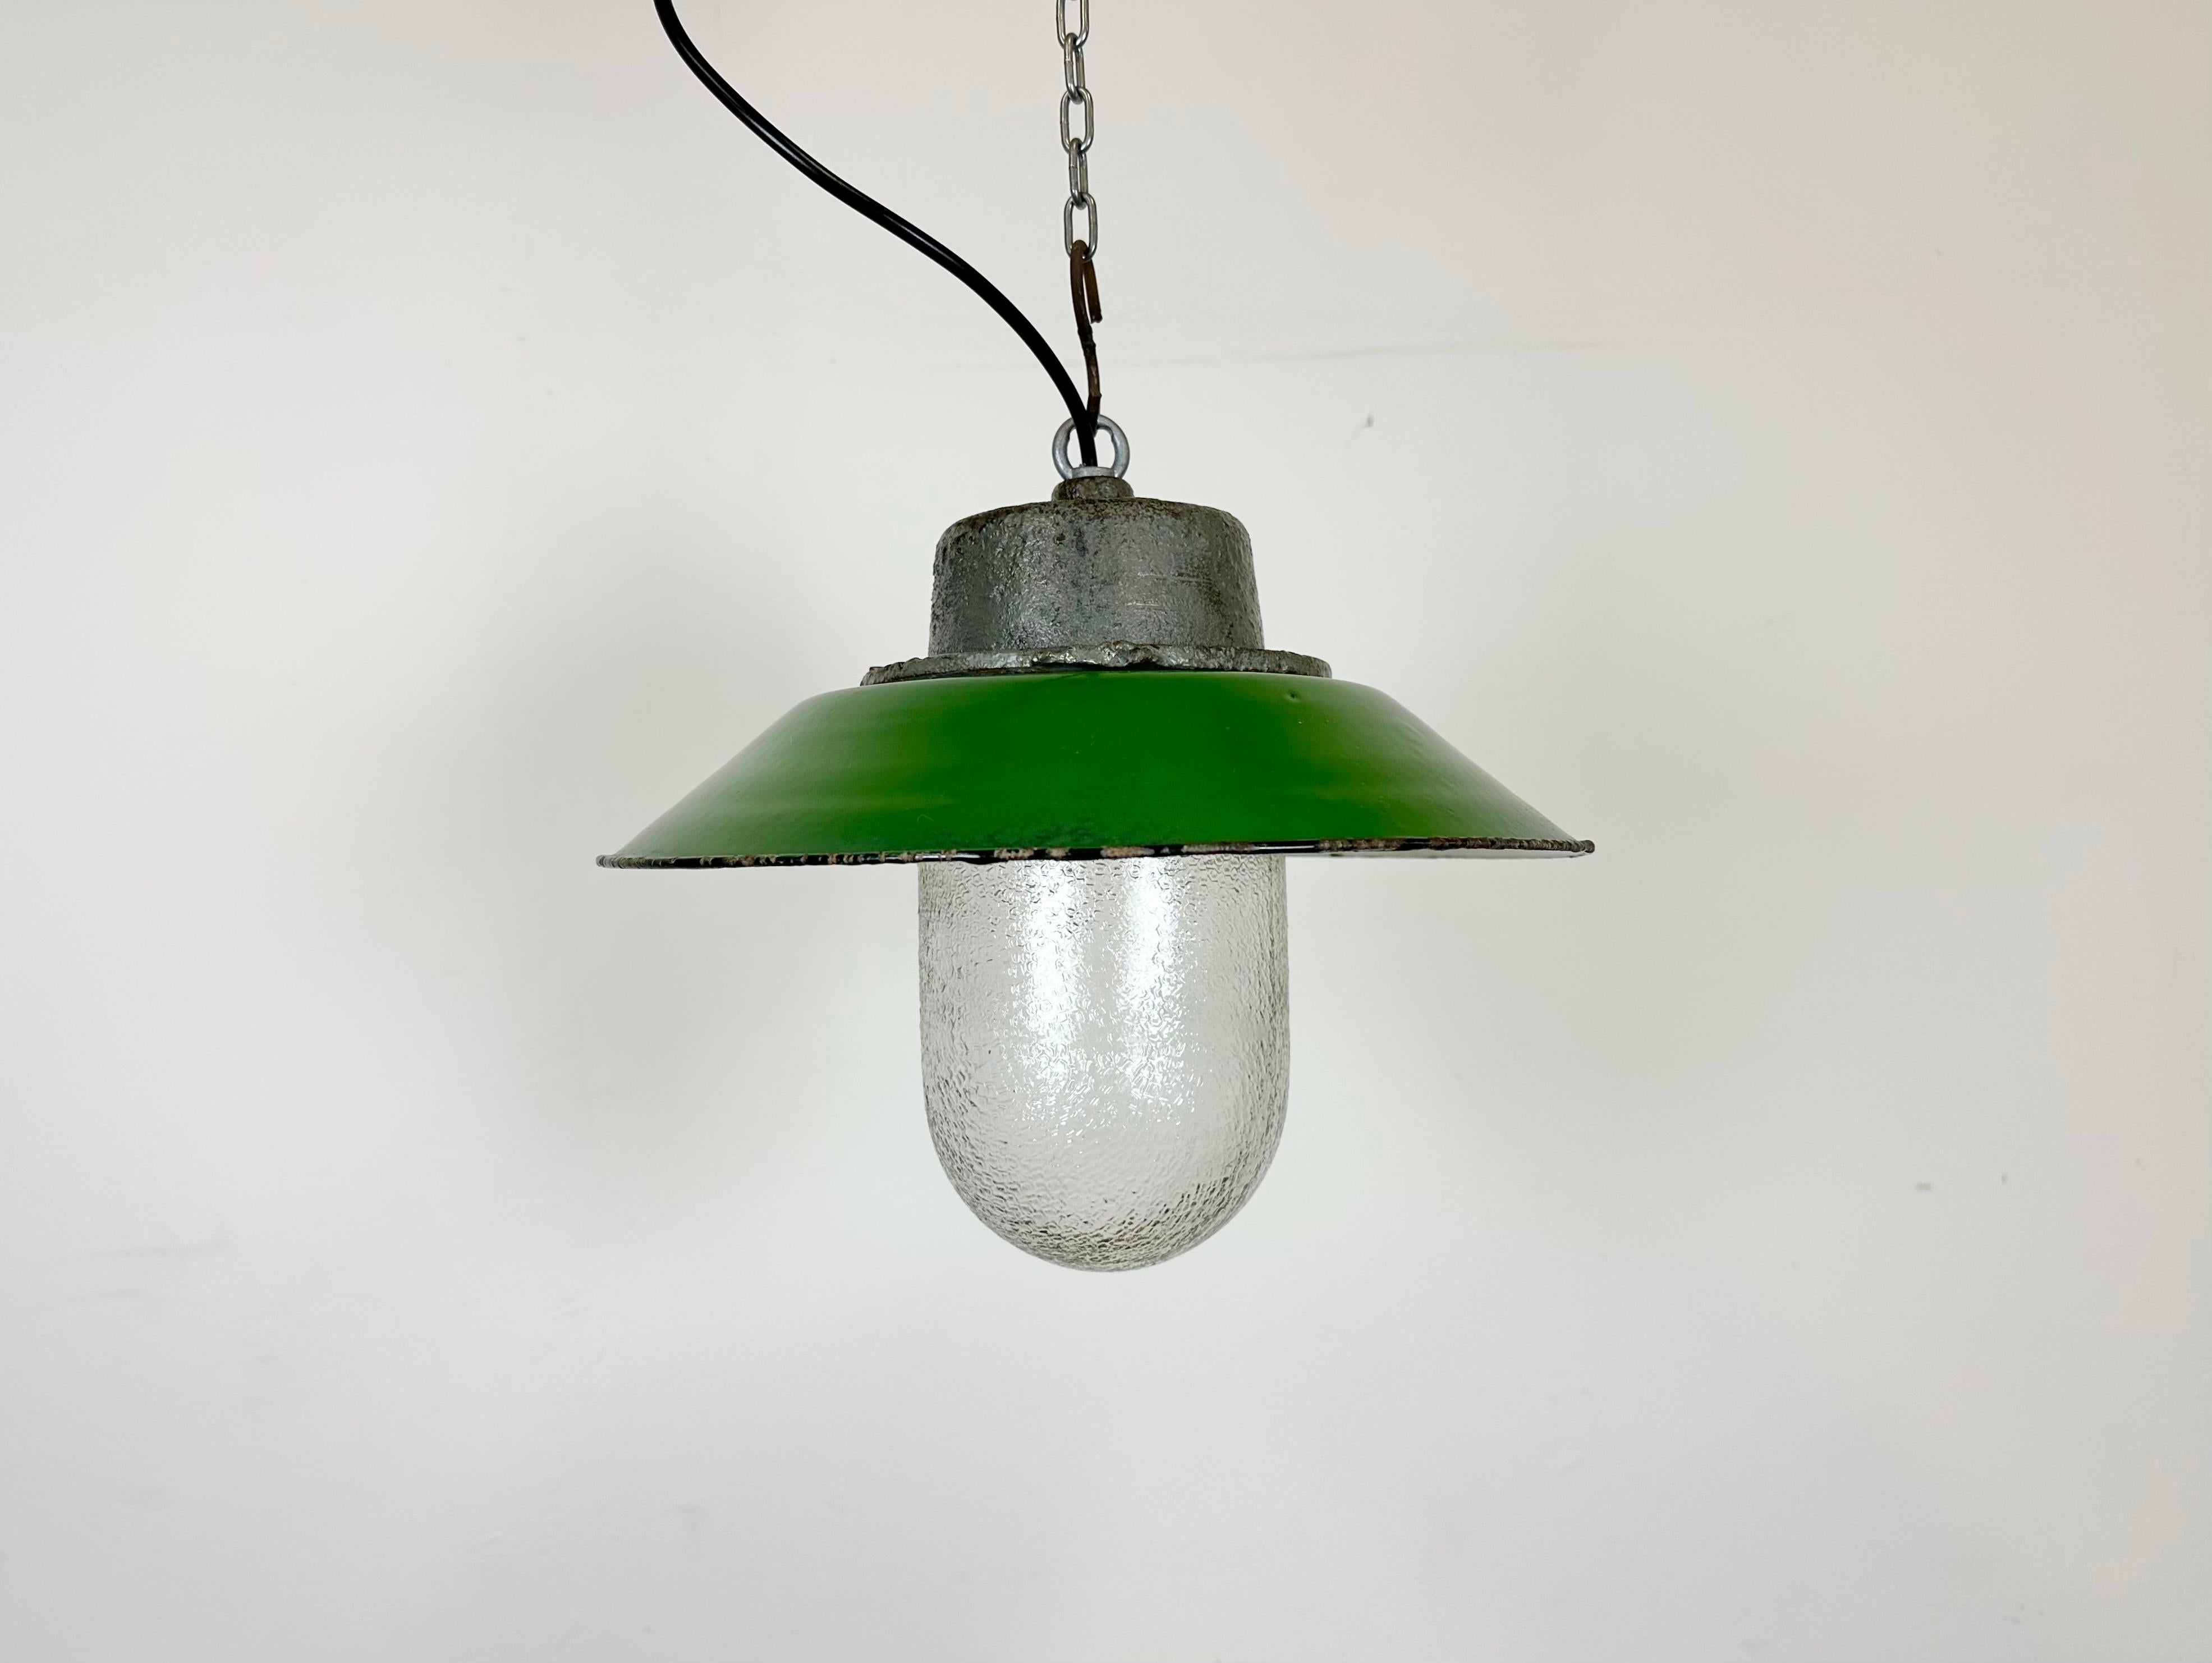 Hanging lamp manufactured by Przyslosc Sosnowiec in Poland during the 1960s. It features a green enamel shade with a white enamel interior, a cast iron top, and a frosted glass cover. The porcelain socket requires E 27/ E26 lightbulbs. New wire. The